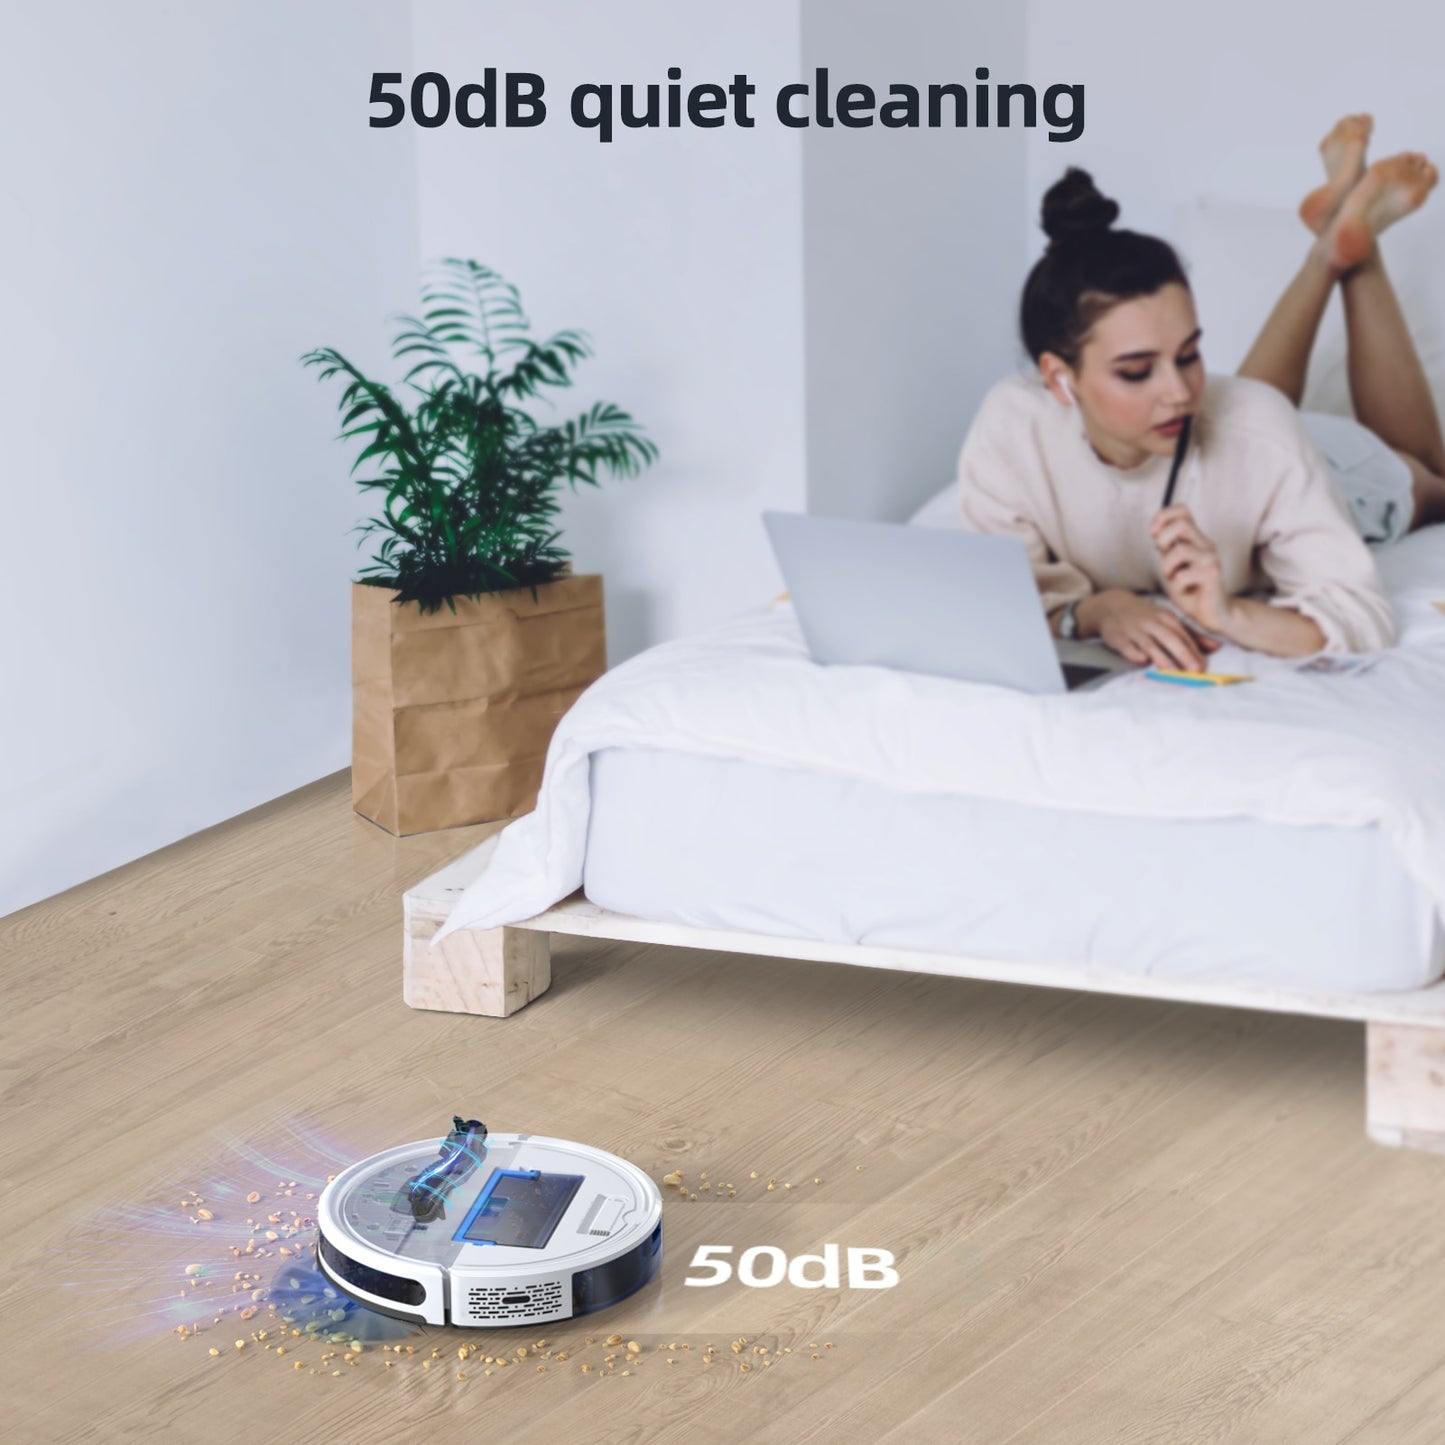 G20 Robot Vacuum Cleaner Sweep and Wet Mopping Floors&amp;Carpet Run Auto Reharge Appliances Household Tool Dust Electric Sweeper